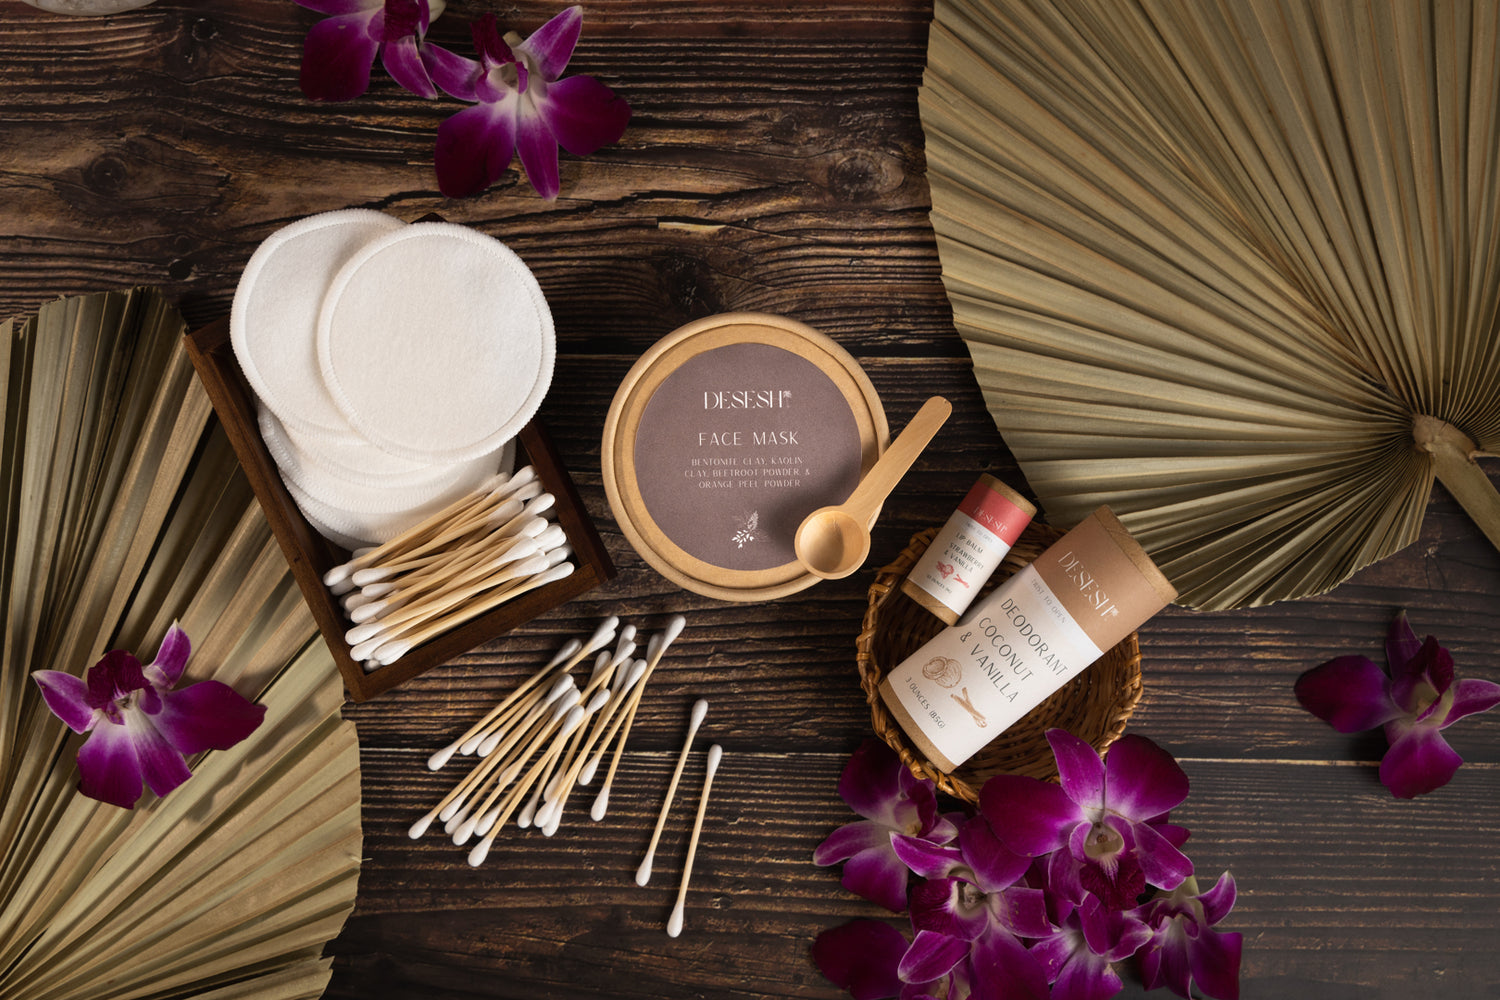 This image shows a range of plastic free skincare products including natural aluminum free deodorant, natural lip balm, face mask powder, reusable cotton buds and rounds. The products are on a wood surface next to orchids and dried palm leaves. These are a part of Desesh's range of zero waste, plastic free, eco friendly, more sustainable personal care and everyday essential products.